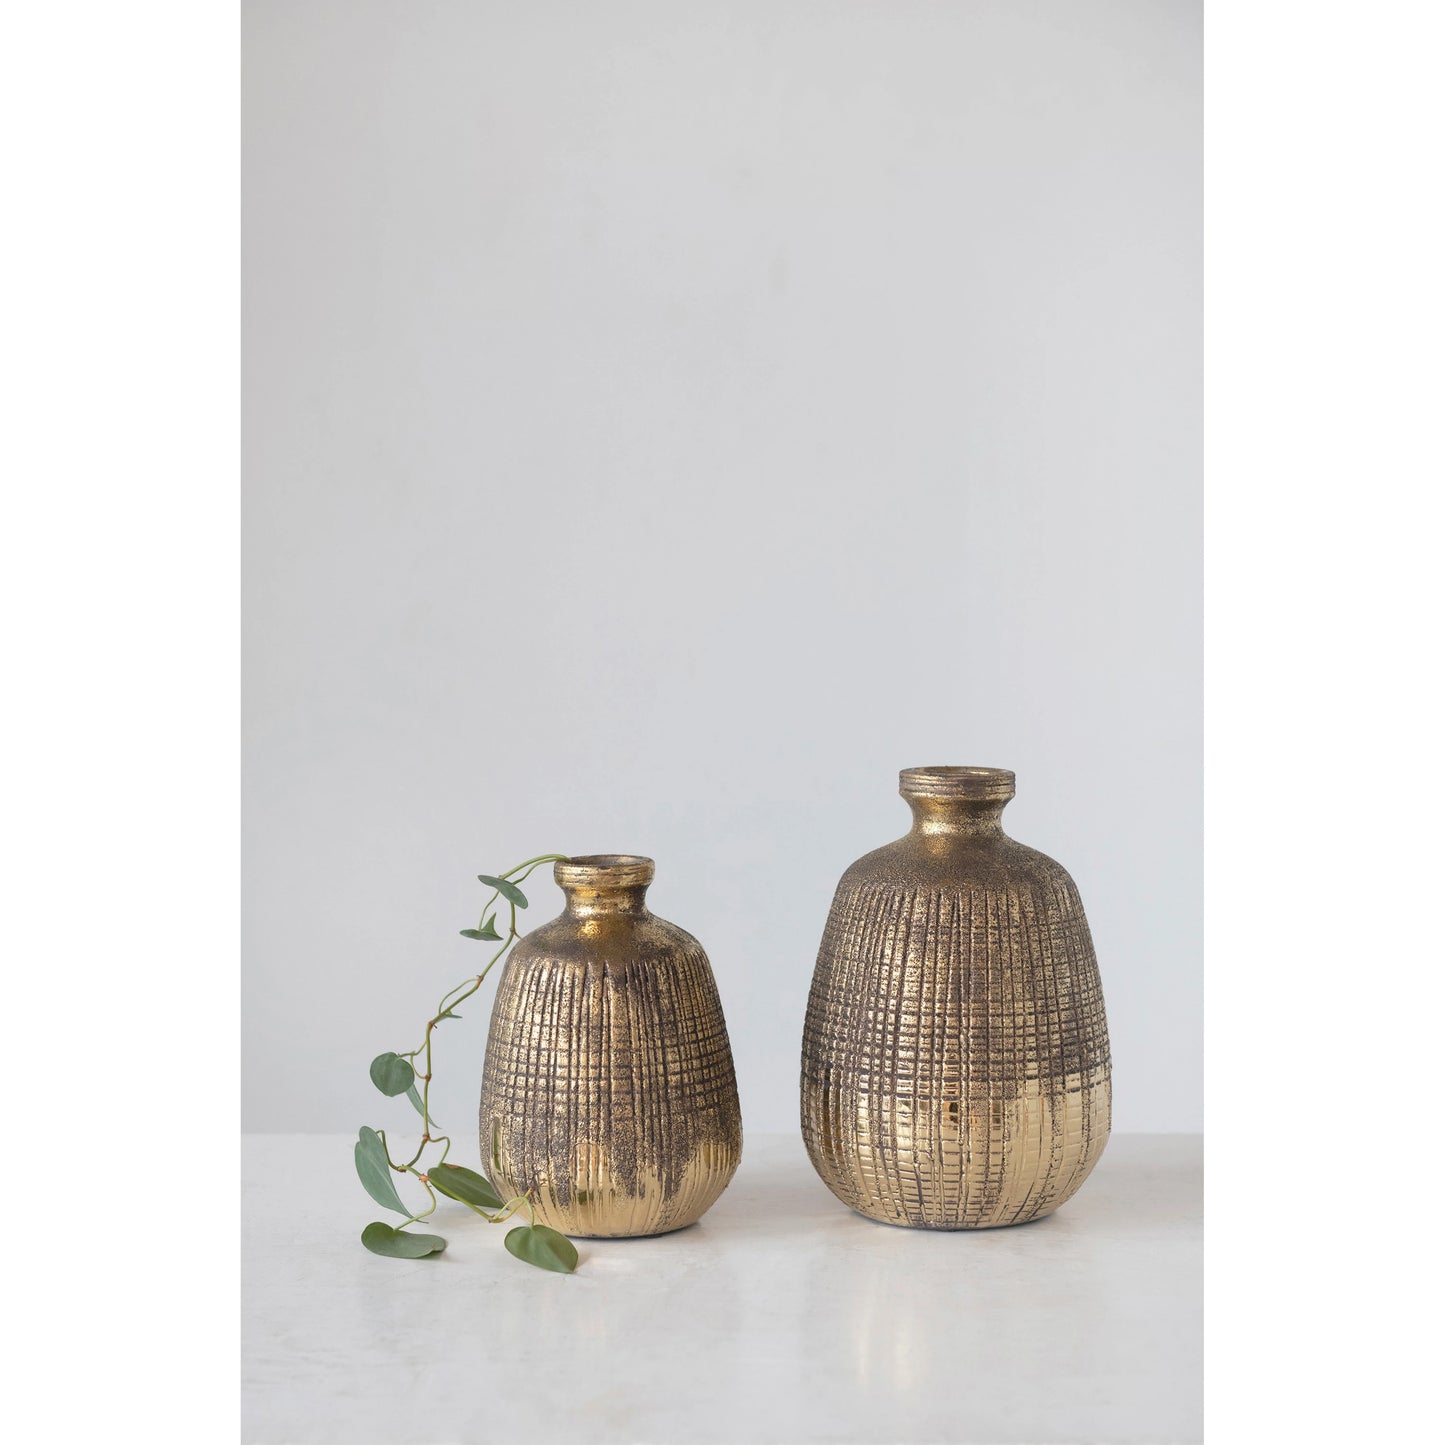 Textured Terra-cotta Vase with Lines, Gold Finish